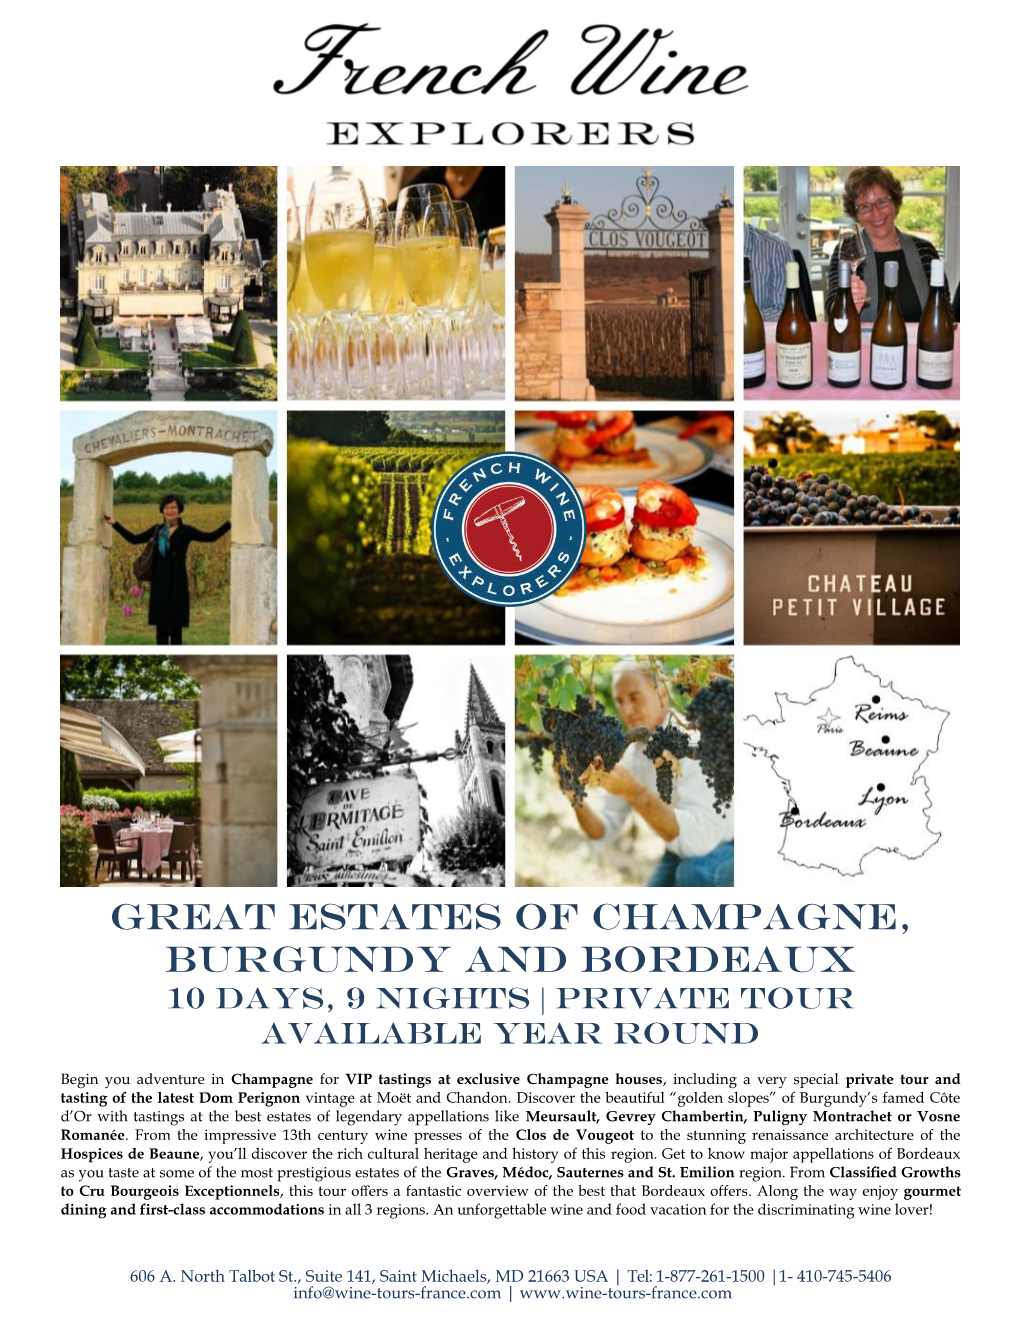 Great Estates of Champagne, Burgundy and Bordeaux 10 Days, 9 Nights | Private Tour Available Year Round